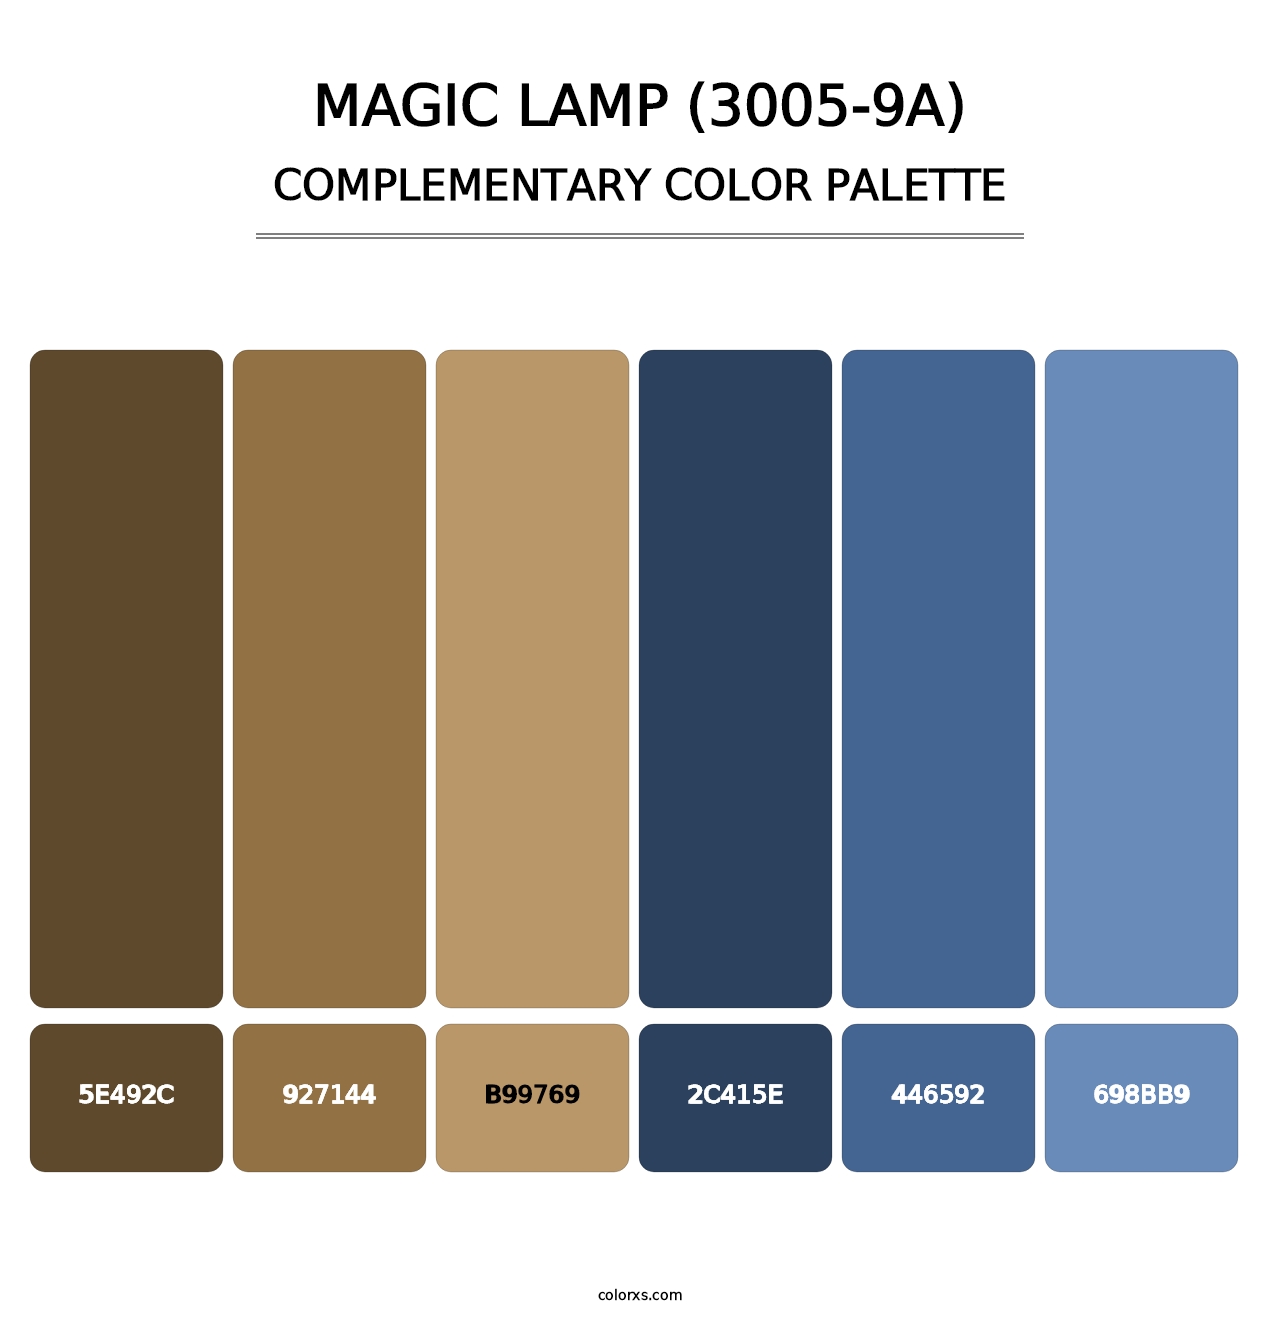 Magic Lamp (3005-9A) - Complementary Color Palette